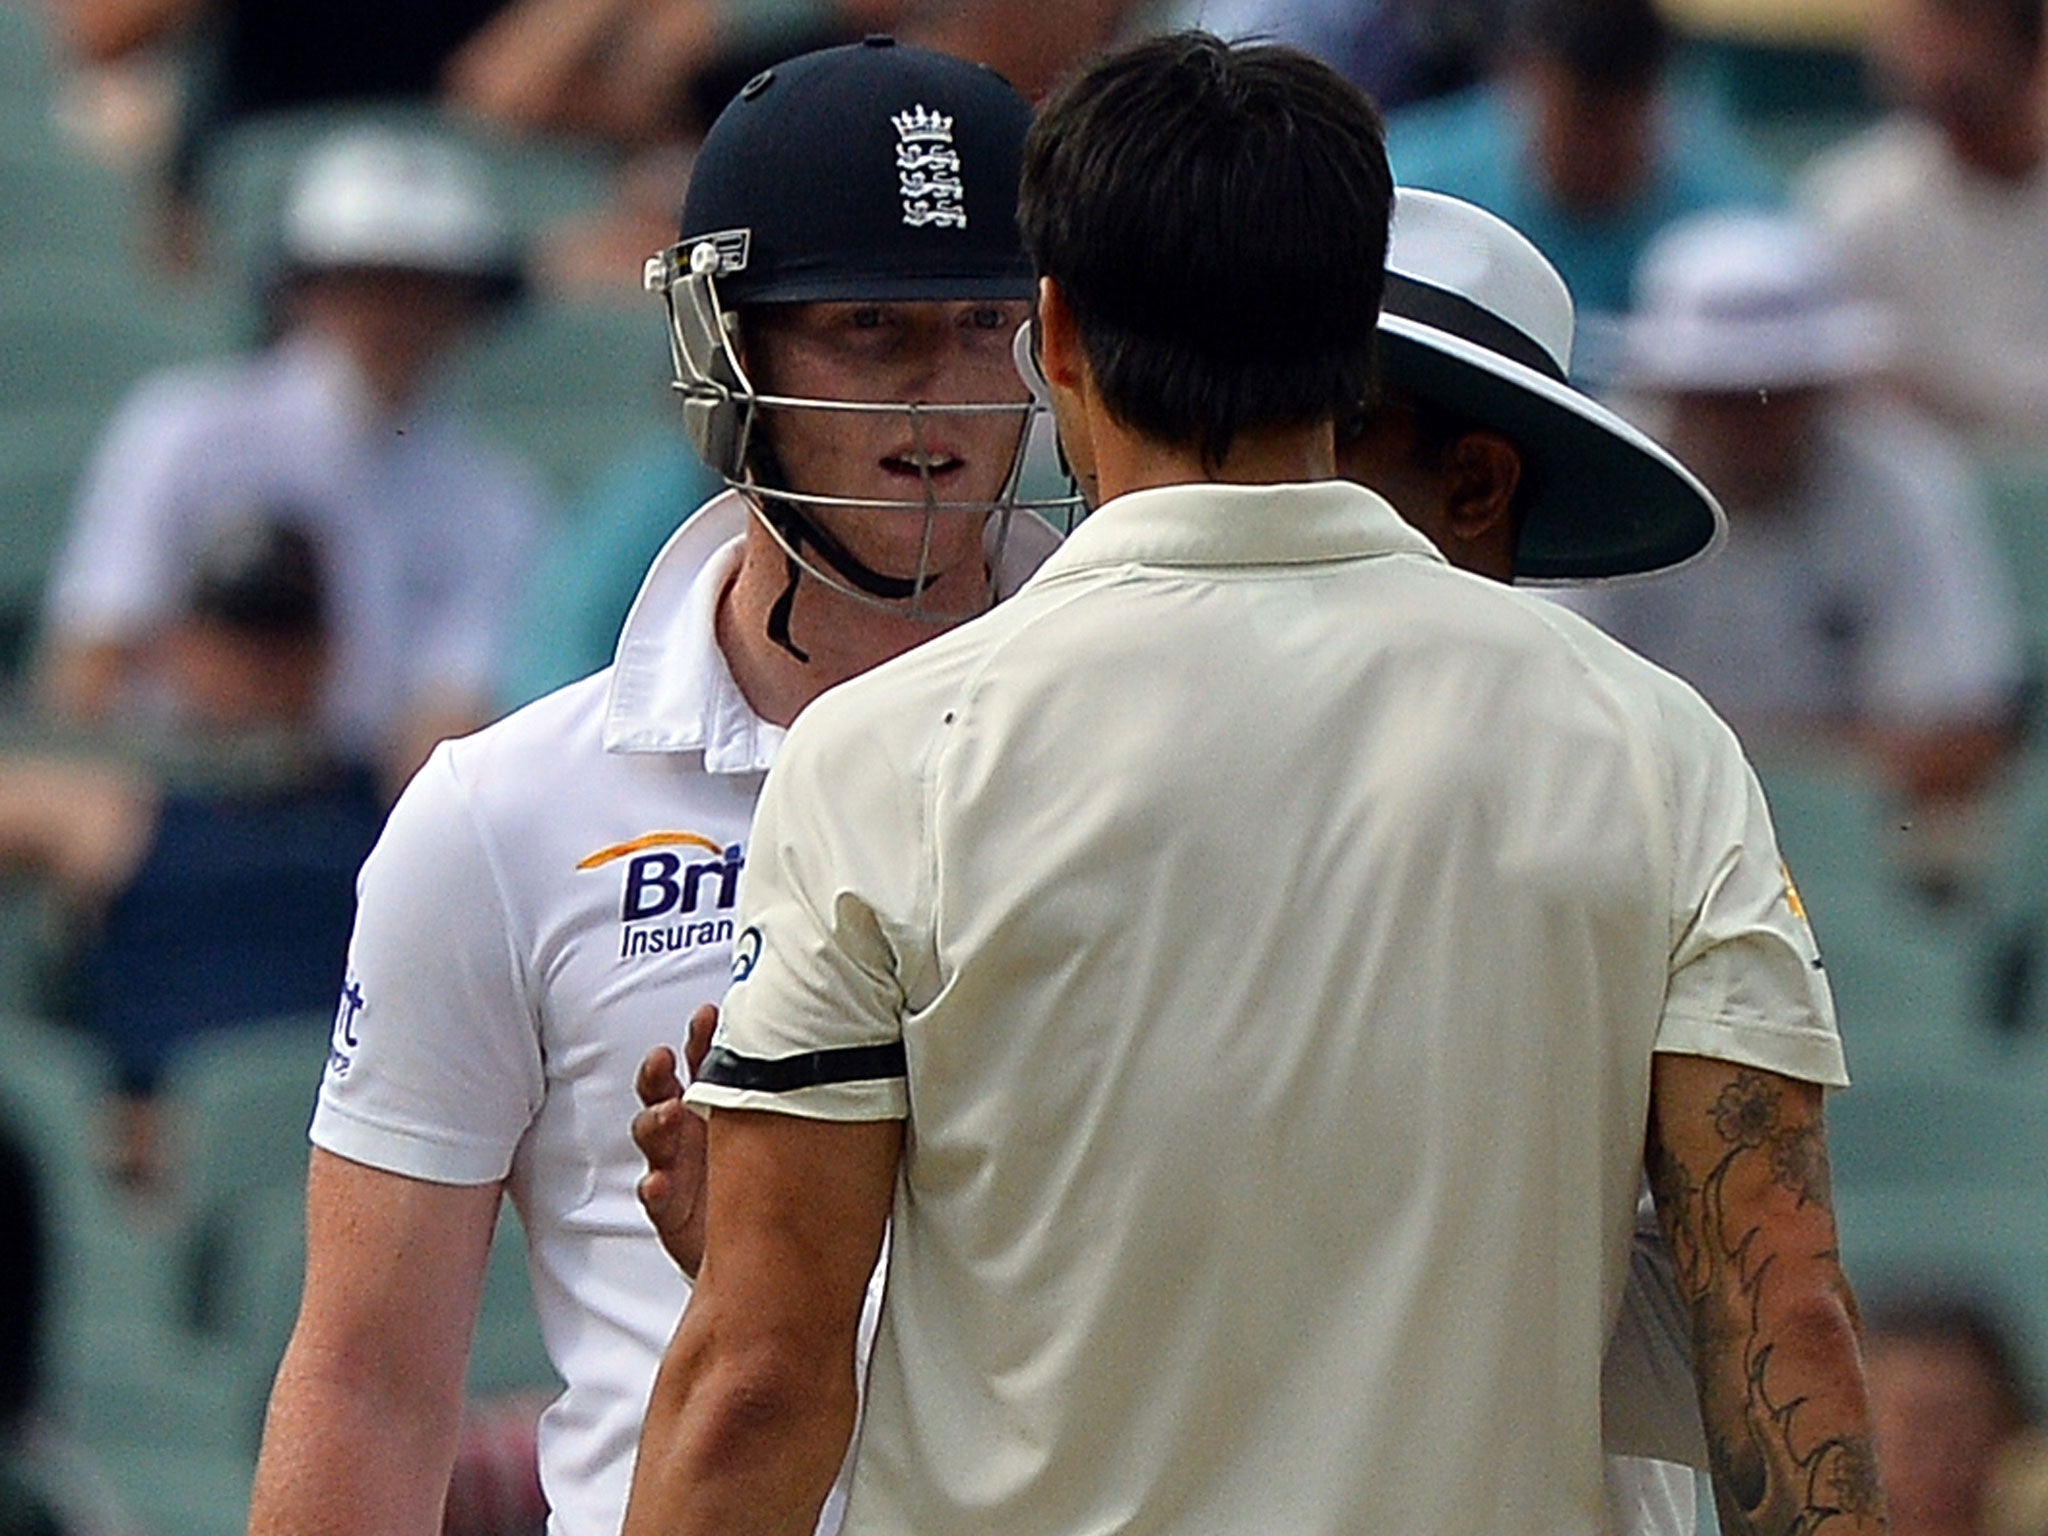 Ben Stokes and Mitchell Johnson confront each other on day four of the second Ashes Test